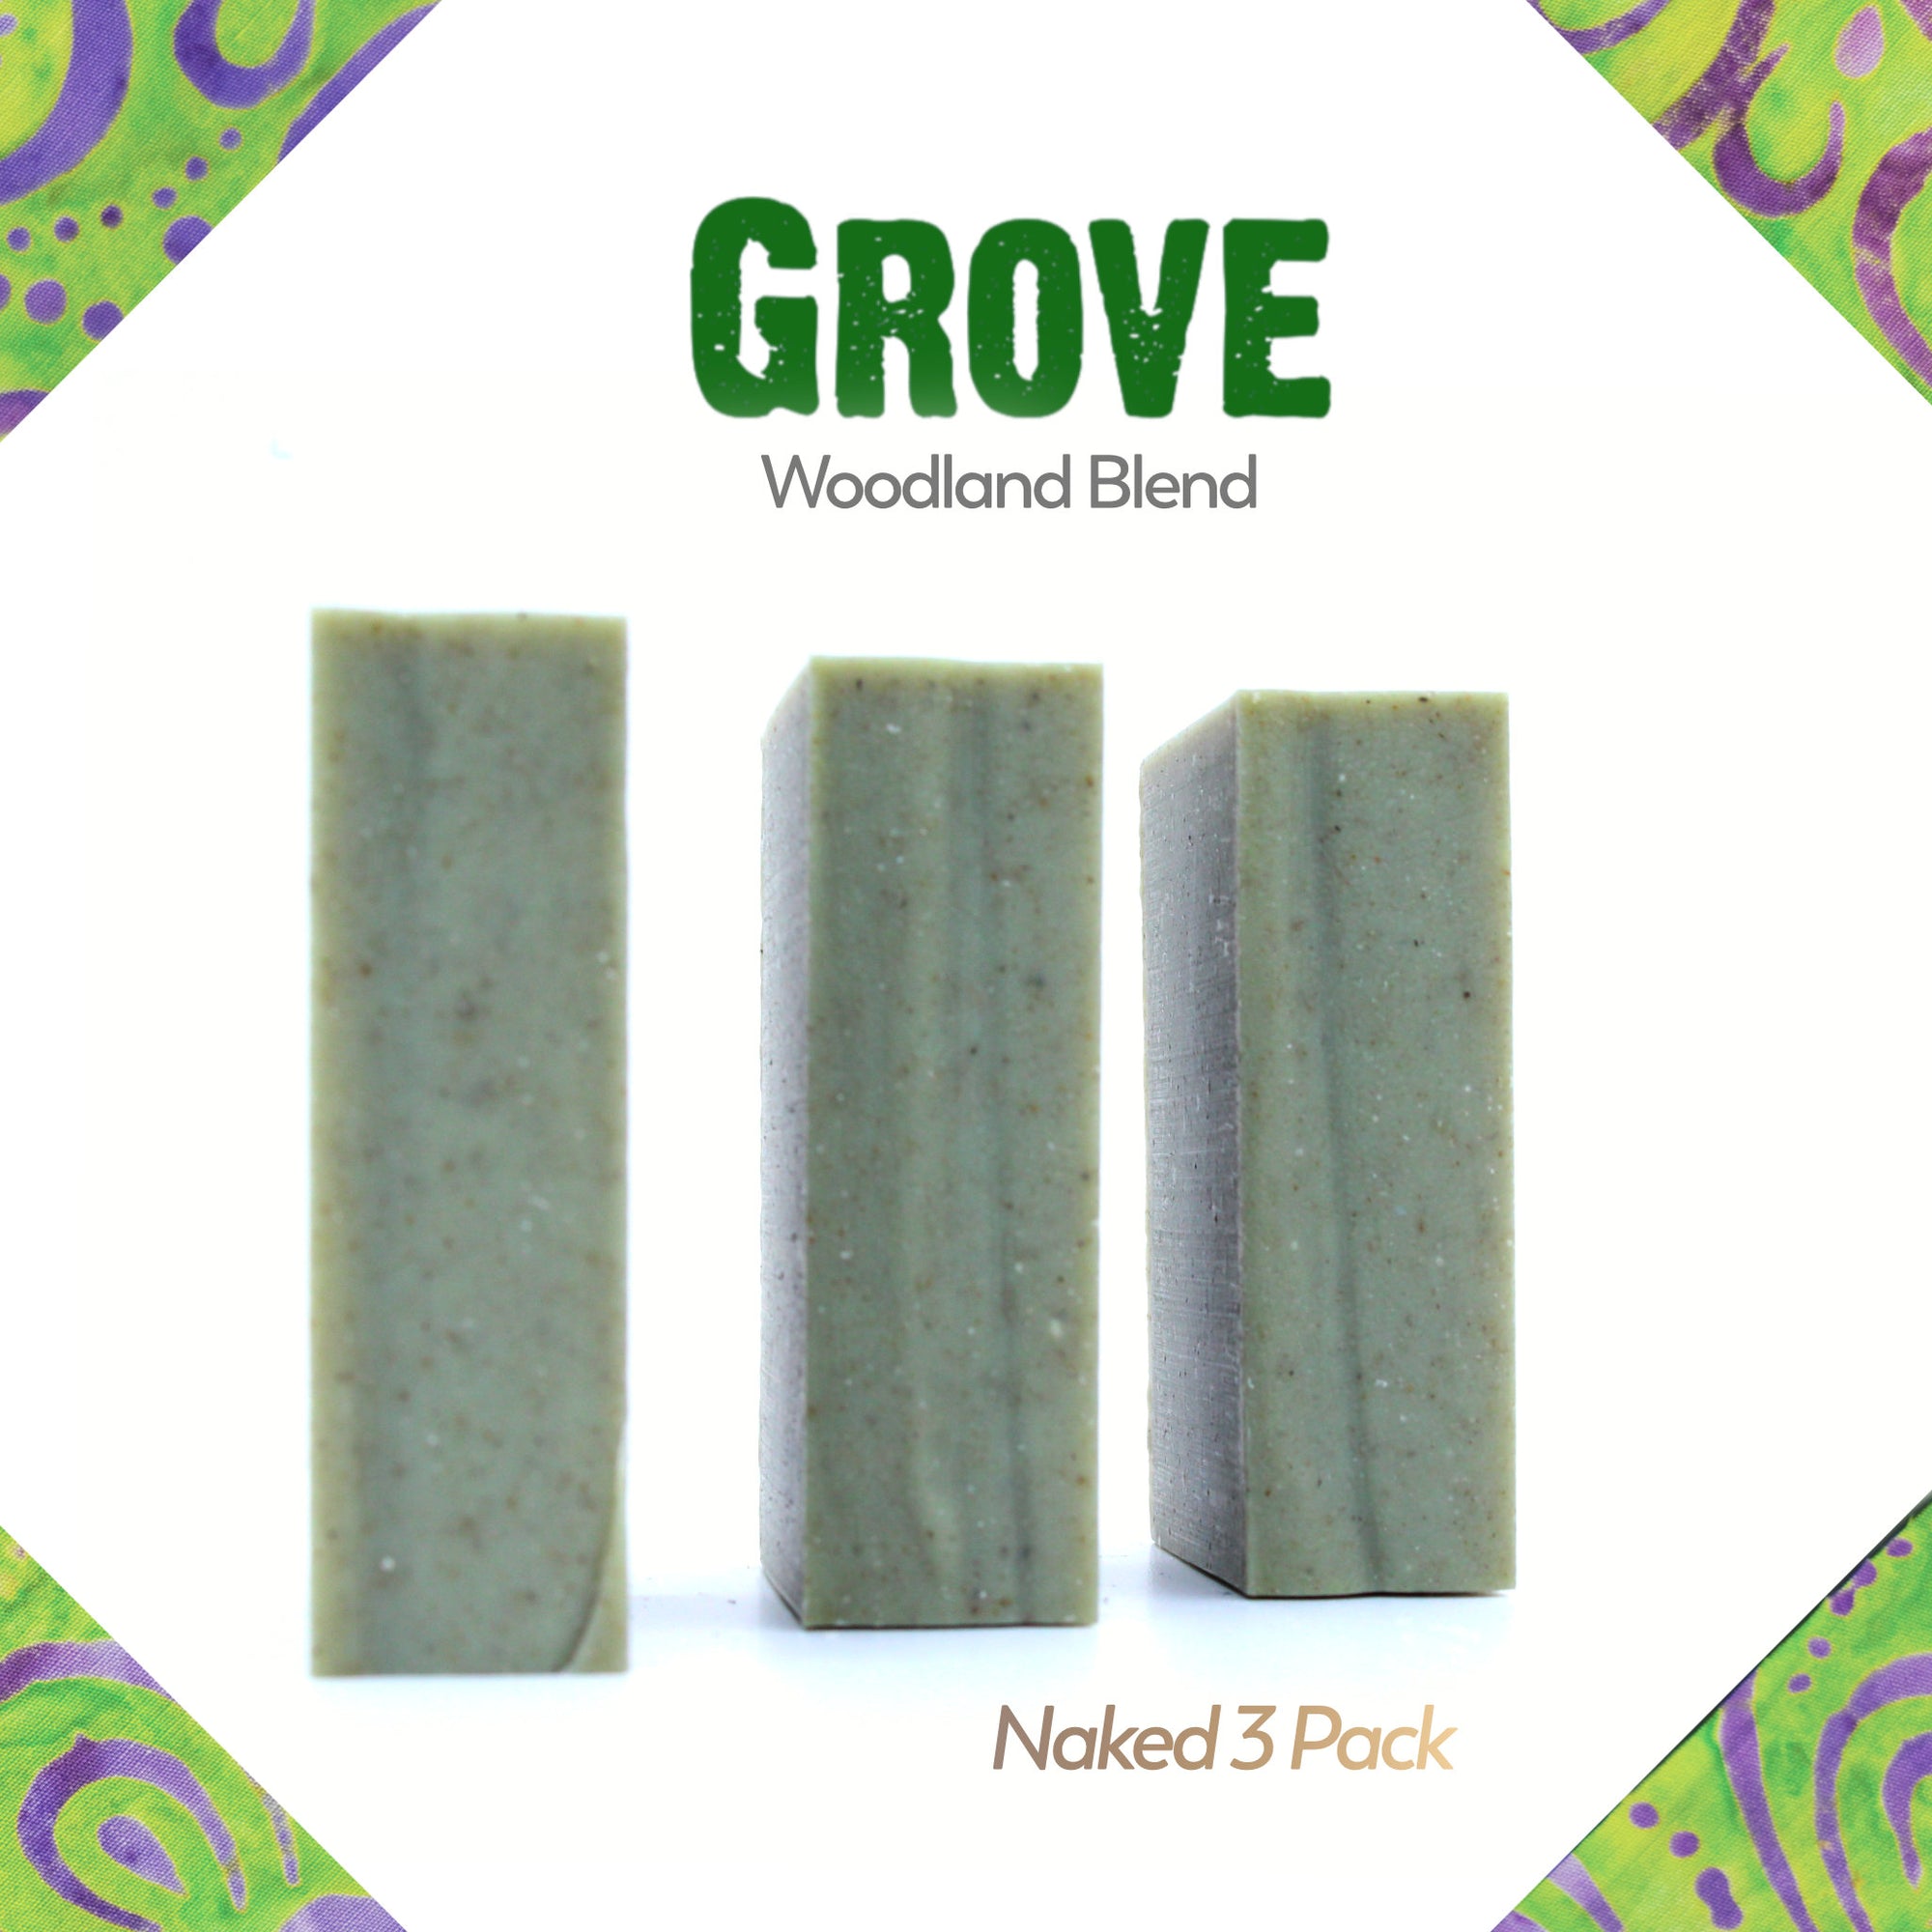 A naked three pack of Grove cedar & pine essential oil and rhassoul clay organic bar soap from ground Soap.